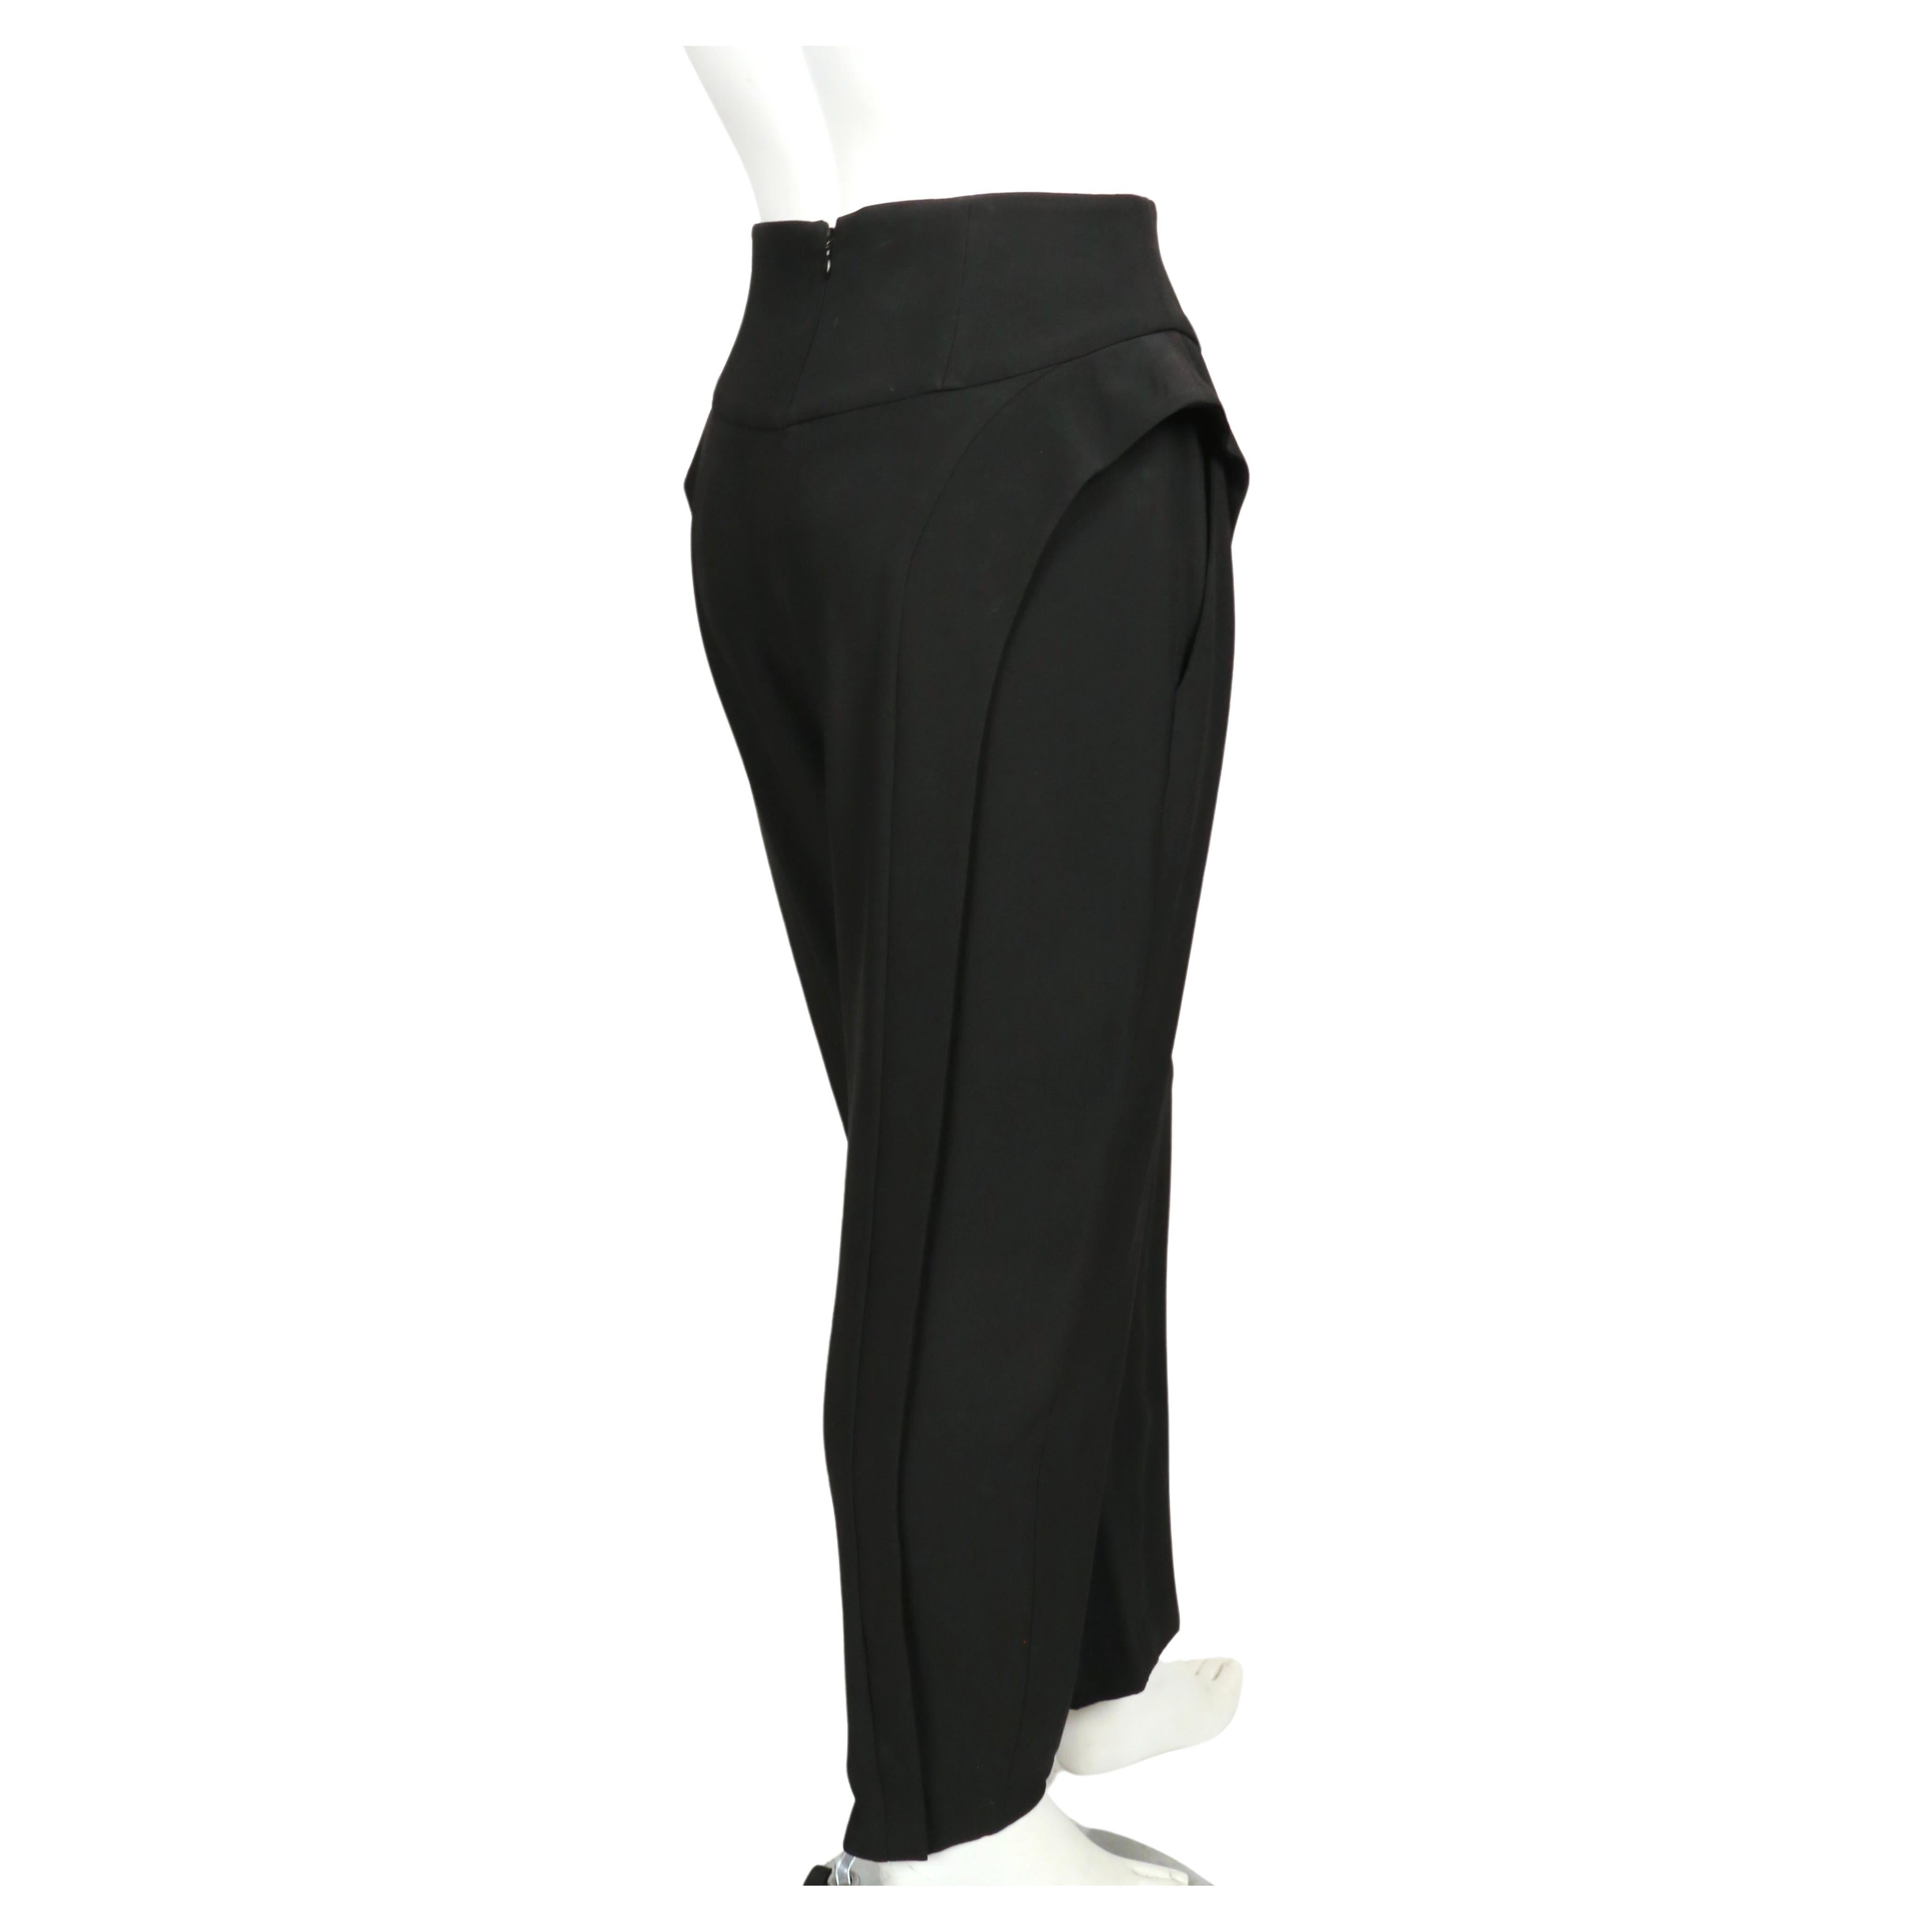 2000's ALEXANDER MCQUEEN black pants with side ruffles For Sale 2